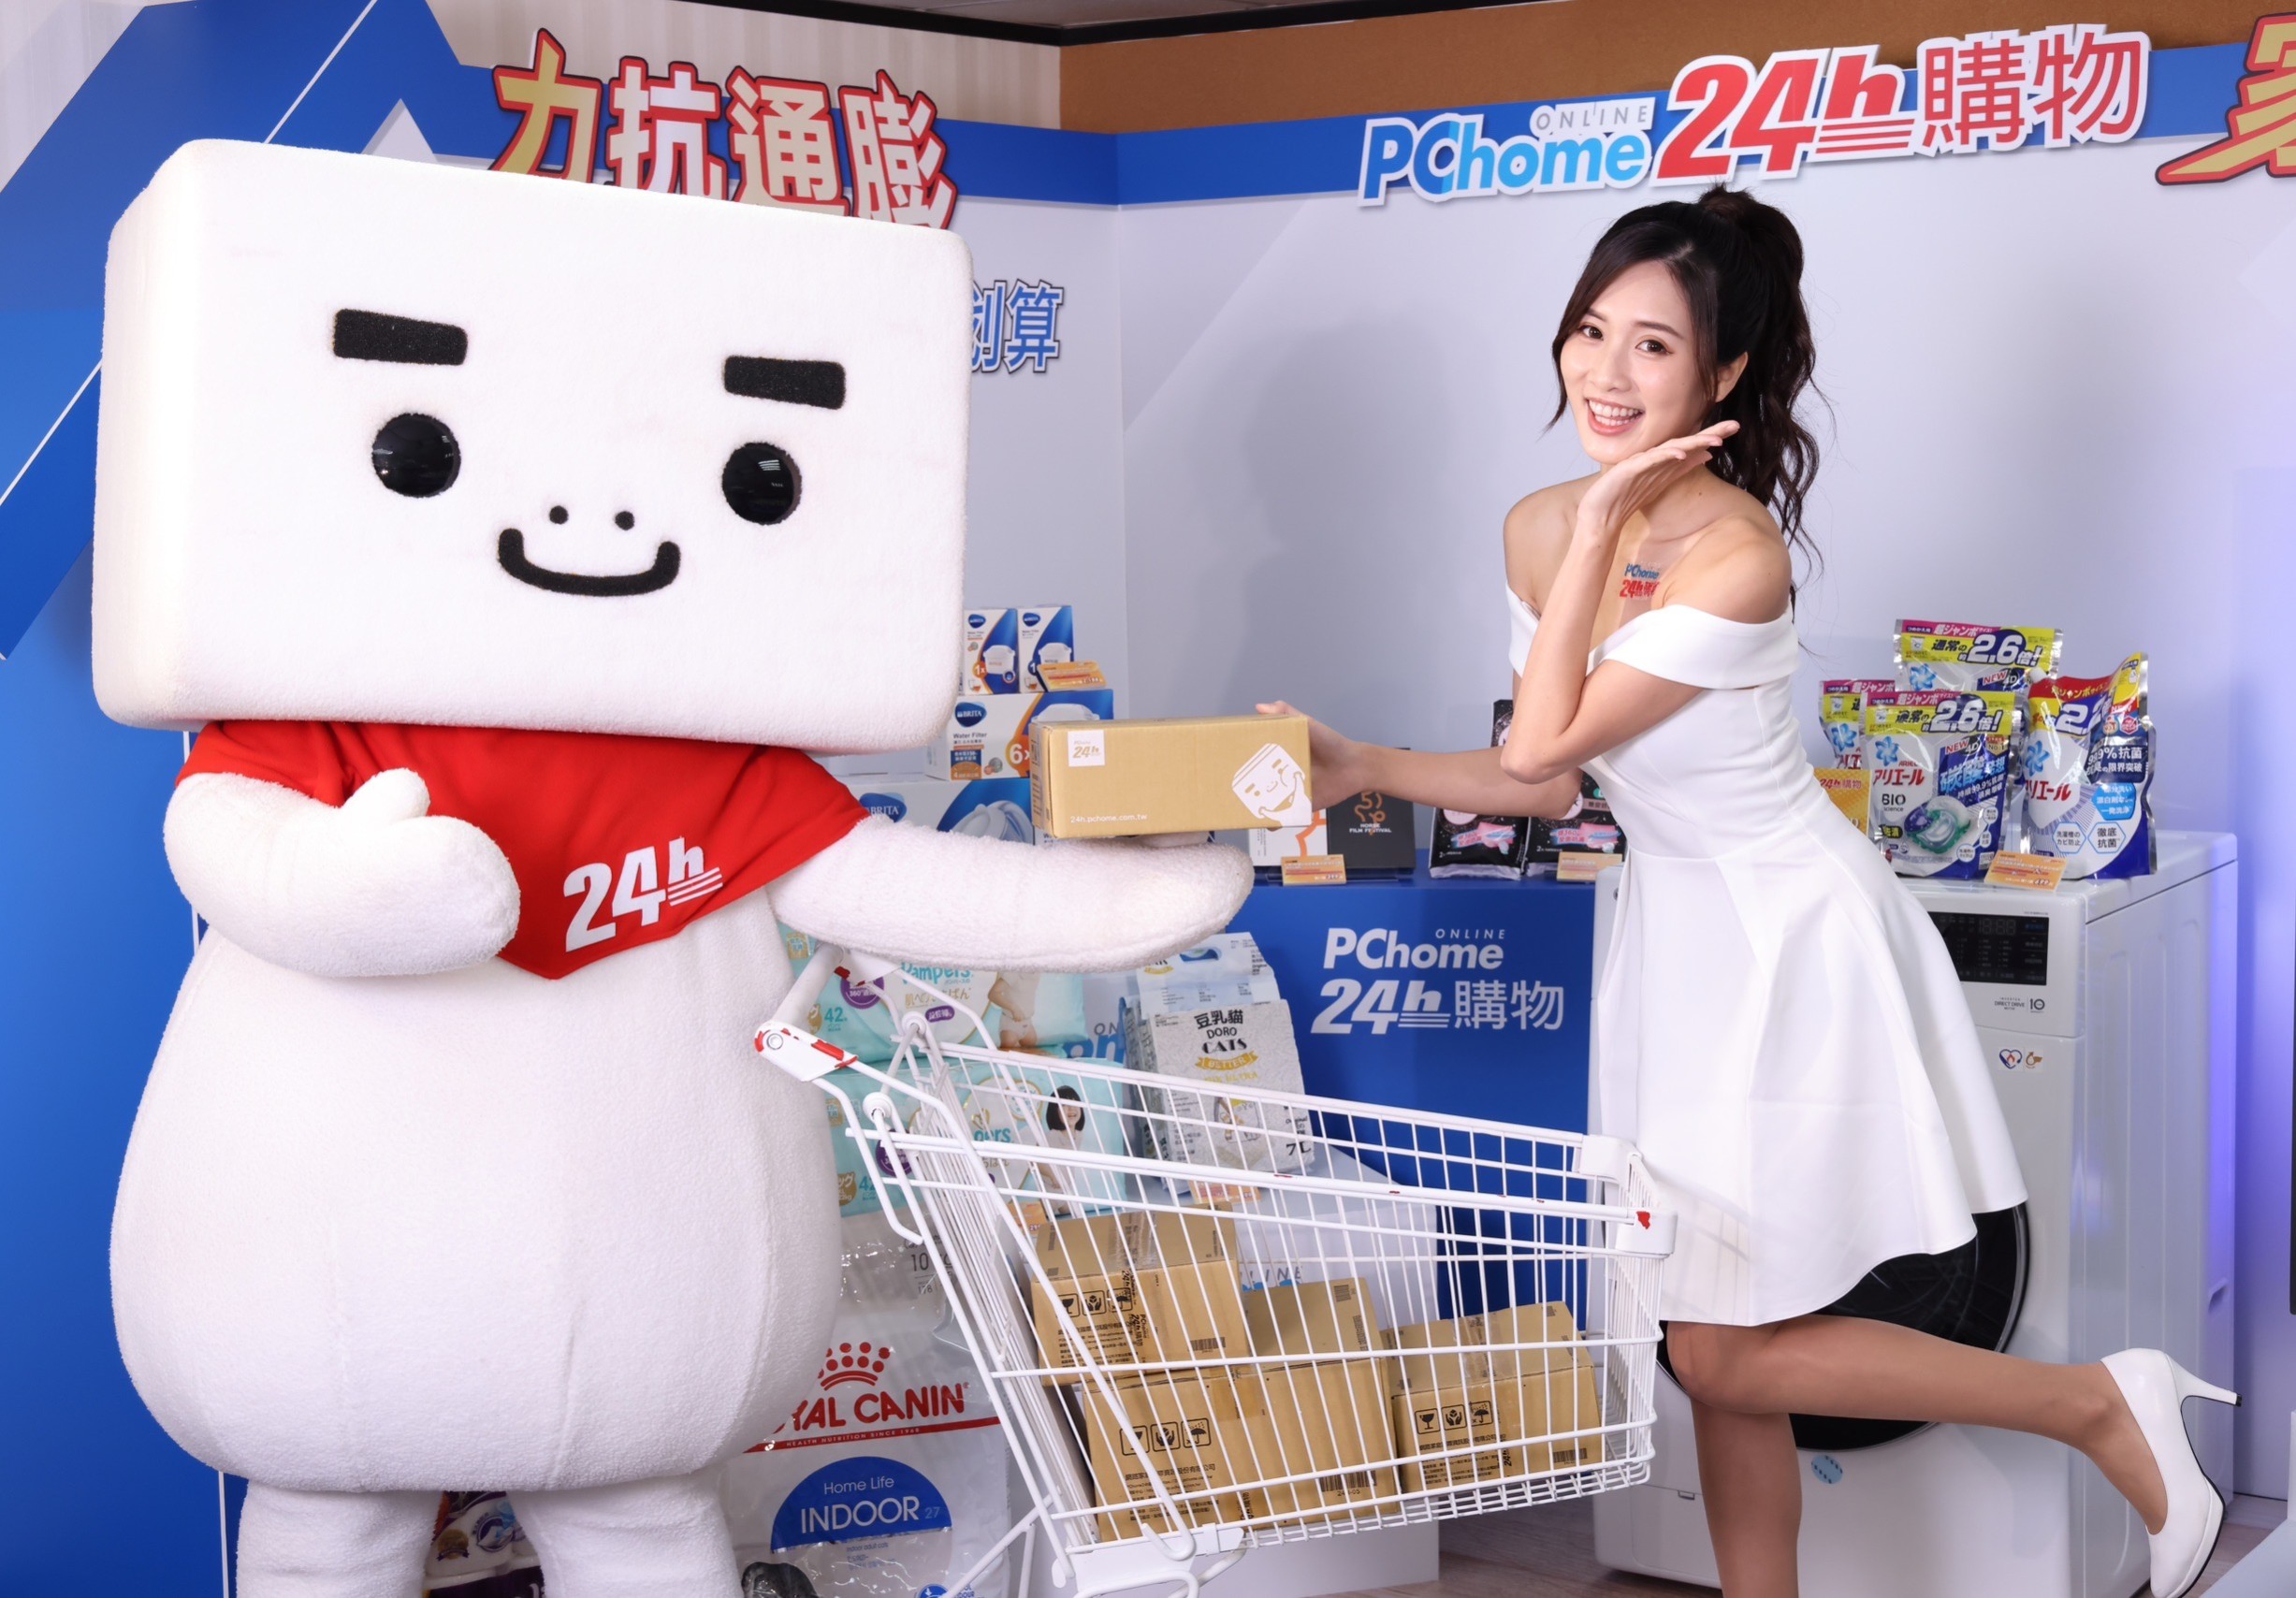 Daily Sales at PChome 24h Shopping during the Double 11 Shopping Festival Increases by 25% YOY